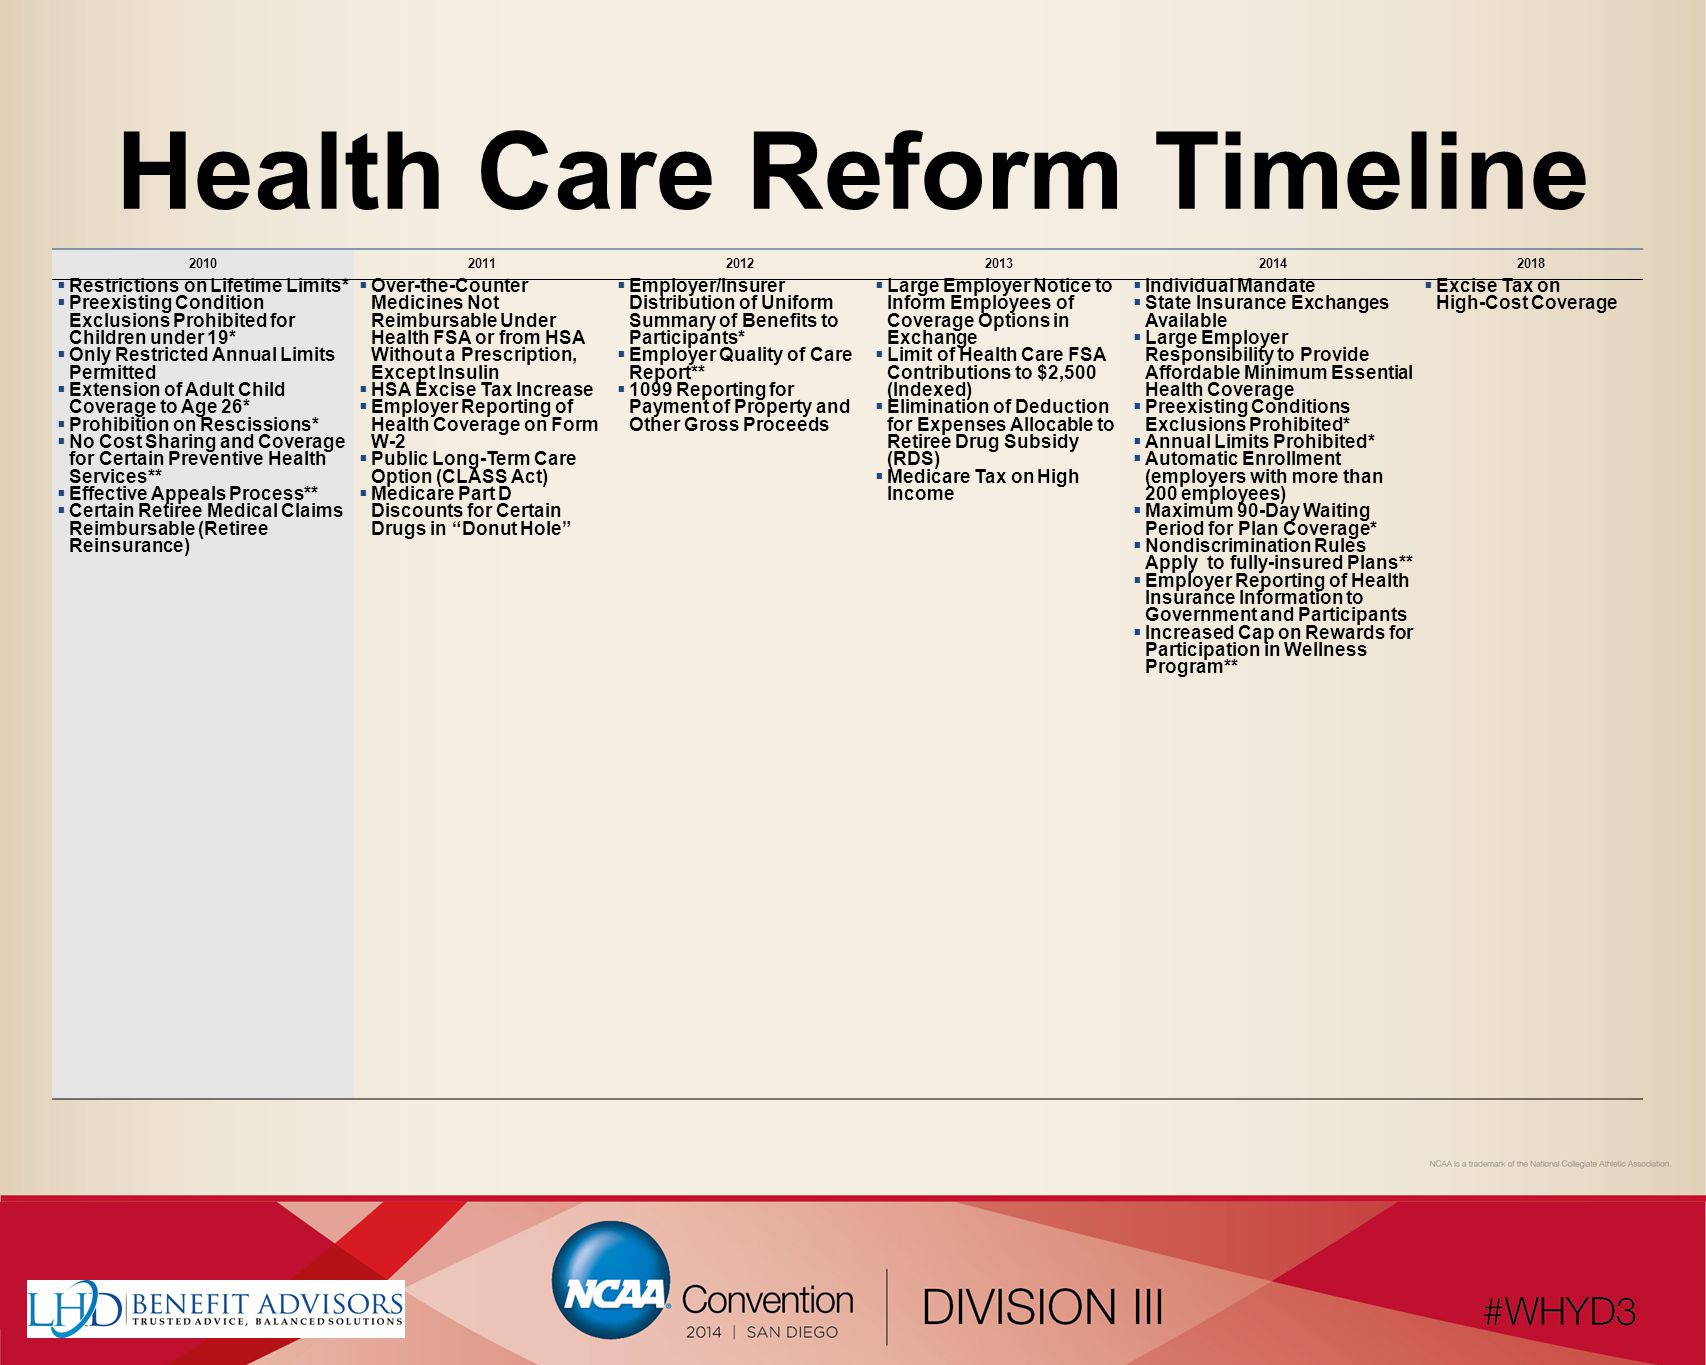 Health Care Reform Timeline  Restrictions on Lifetime Limits*  Preexisting Condition Exclusions Prohibited for Children under 19*  Only Restricted Annual Limits Permitted  Extension of Adult Child Coverage to Age 26*  Prohibition on Rescissions*  No Cost Sharing and Coverage for Certain Preventive Health Services**  Effective Appeals Process**  Certain Retiree Medical Claims Reimbursable (Retiree Reinsurance)  Over-the-Counter Medicines Not Reimbursable Under Health FSA or from HSA Without a Prescription, Except Insulin  HSA Excise Tax Increase  Employer Reporting of Health Coverage on Form W-2  Public Long-Term Care Option (CLASS Act)  Medicare Part D Discounts for Certain Drugs in Donut Hole  Employer/Insurer Distribution of Uniform Summary of Benefits to Participants*  Employer Quality of Care Report**  1099 Reporting for Payment of Property and Other Gross Proceeds  Large Employer Notice to Inform Employees of Coverage Options in Exchange  Limit of Health Care FSA Contributions to $2,500 (Indexed)  Elimination of Deduction for Expenses Allocable to Retiree Drug Subsidy (RDS)  Medicare Tax on High Income  Individual Mandate  State Insurance Exchanges Available  Large Employer Responsibility to Provide Affordable Minimum Essential Health Coverage  Preexisting Conditions Exclusions Prohibited*  Annual Limits Prohibited*  Automatic Enrollment (employers with more than 200 employees)  Maximum 90-Day Waiting Period for Plan Coverage*  Nondiscrimination Rules Apply to fully-insured Plans**  Employer Reporting of Health Insurance Information to Government and Participants  Increased Cap on Rewards for Participation in Wellness Program**  Excise Tax on High-Cost Coverage